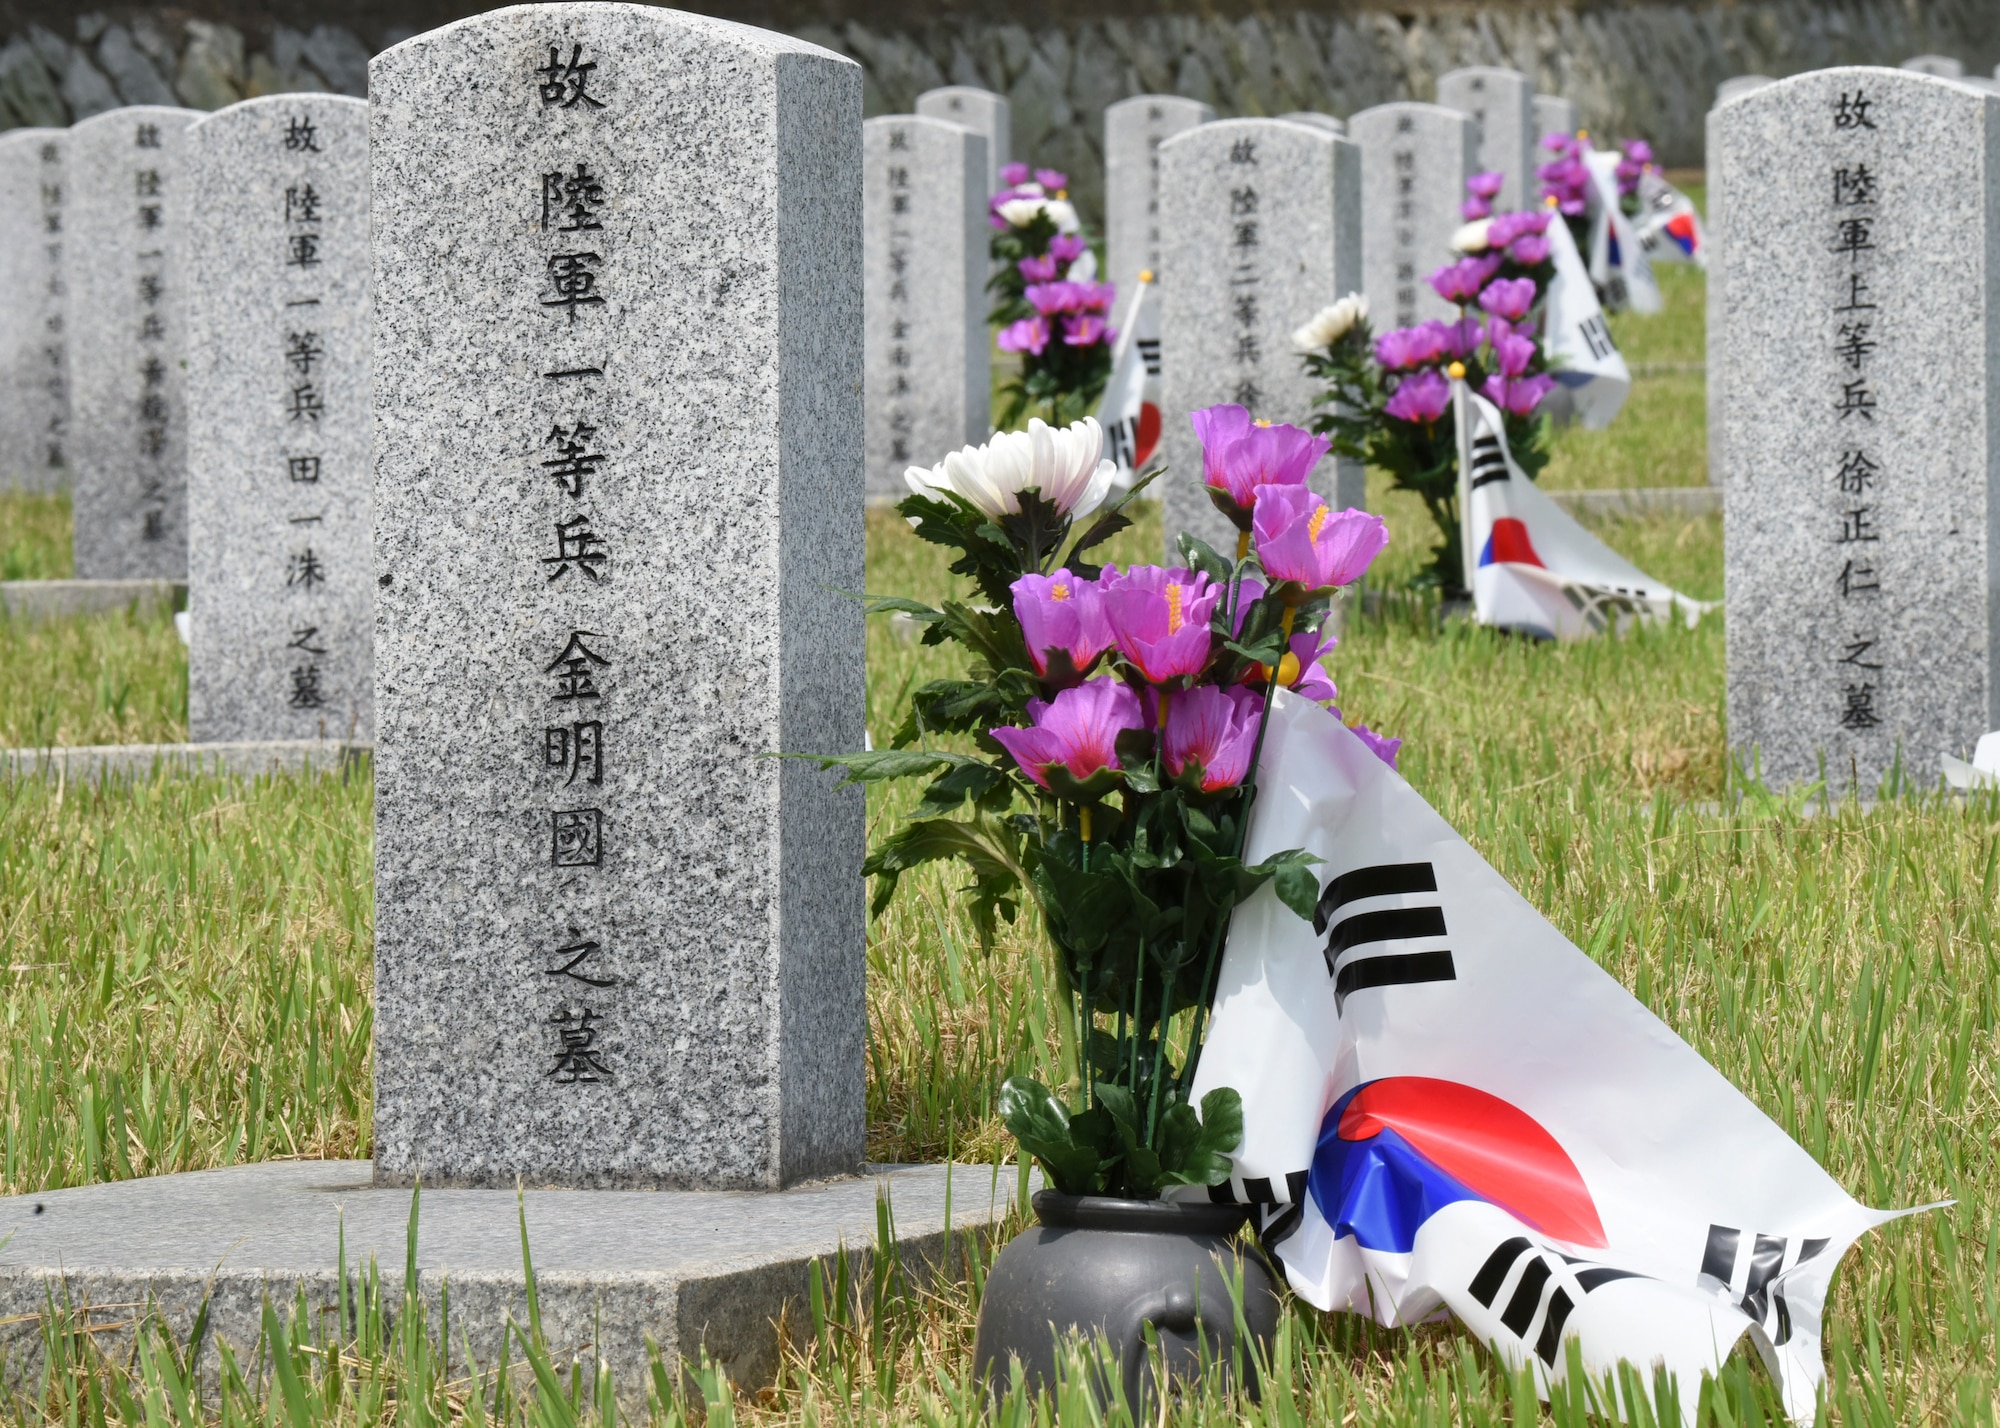 The Korean Memorial Day ceremony in Gunsan City, Republic of Korea, commemorates the lives of Korean citizens who died while serving in the military and those who lost their lives during the independence movement, June 6. Each headstone in the cemetery was honored with flowers and national flag during the Korean Memorial Day holiday. (U.S. Air Force photo by Staff Sgt. Anthony Hetlage)